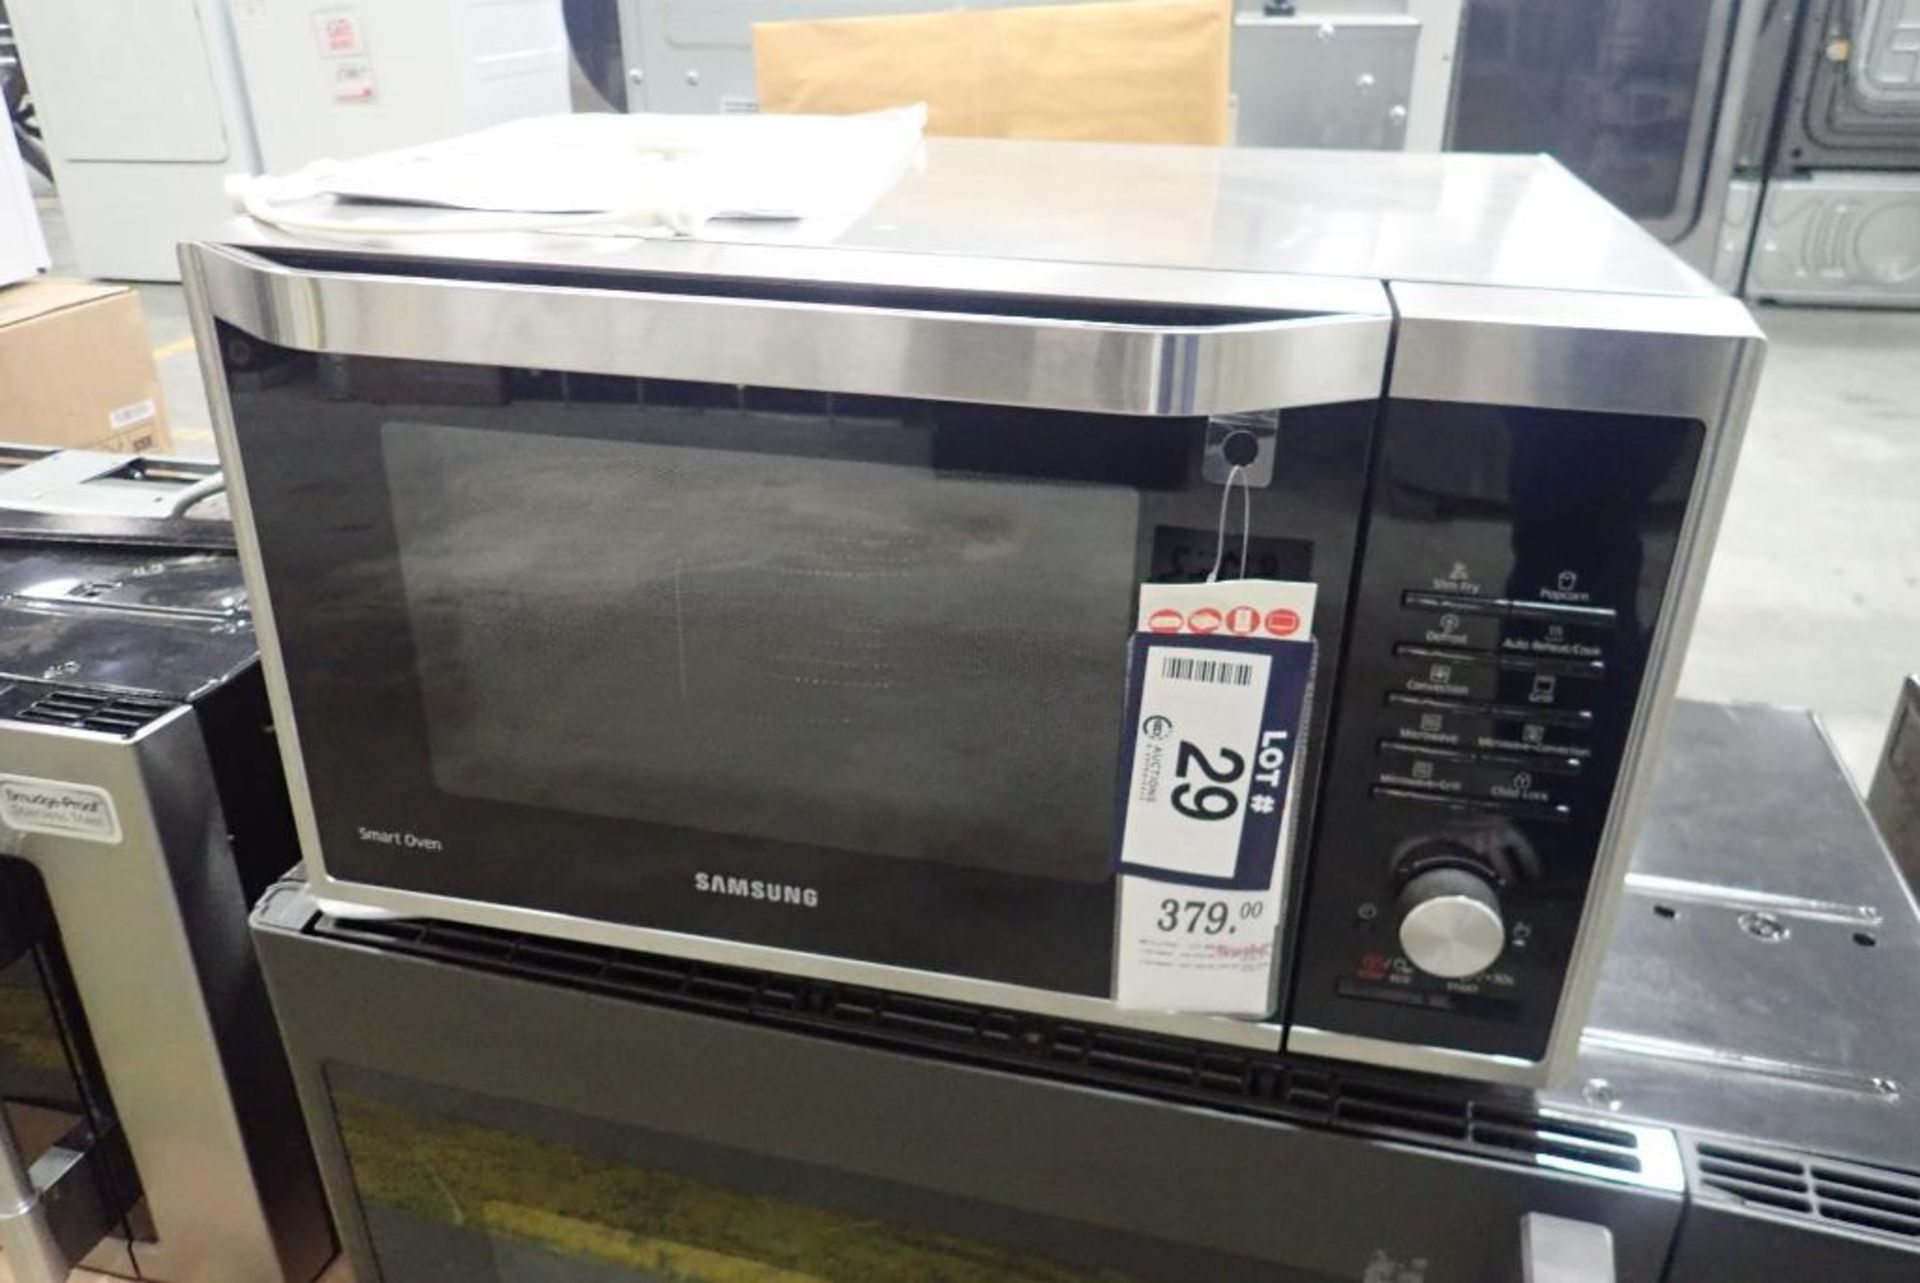 Samsung Smart Oven MC11J703 Stainless Steel Convection Microwave.